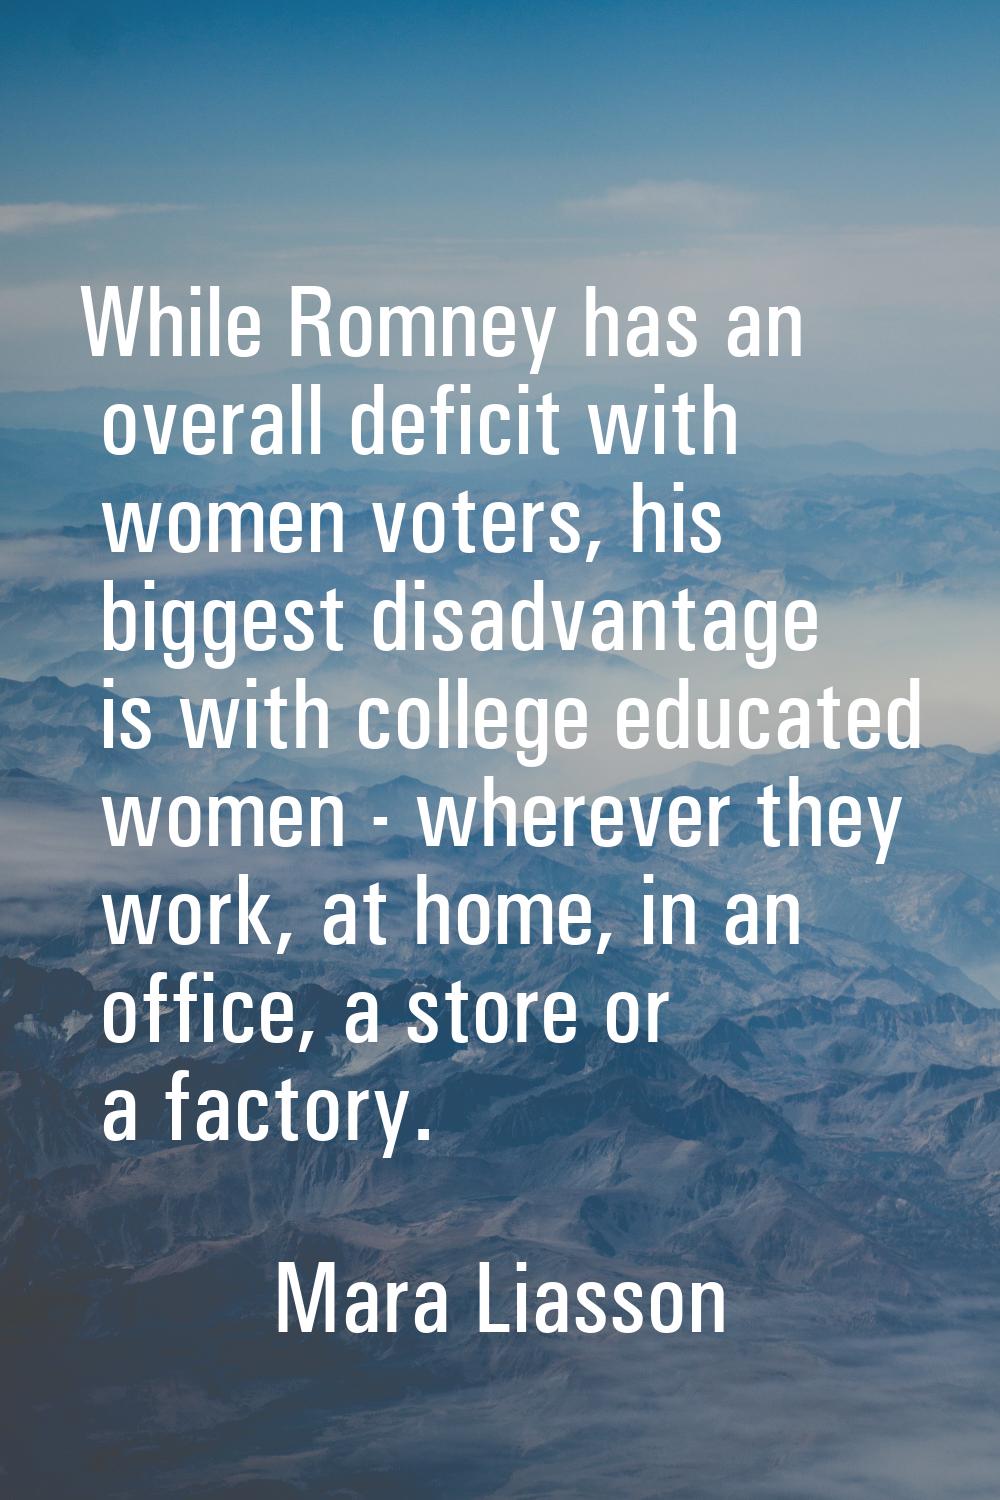 While Romney has an overall deficit with women voters, his biggest disadvantage is with college edu